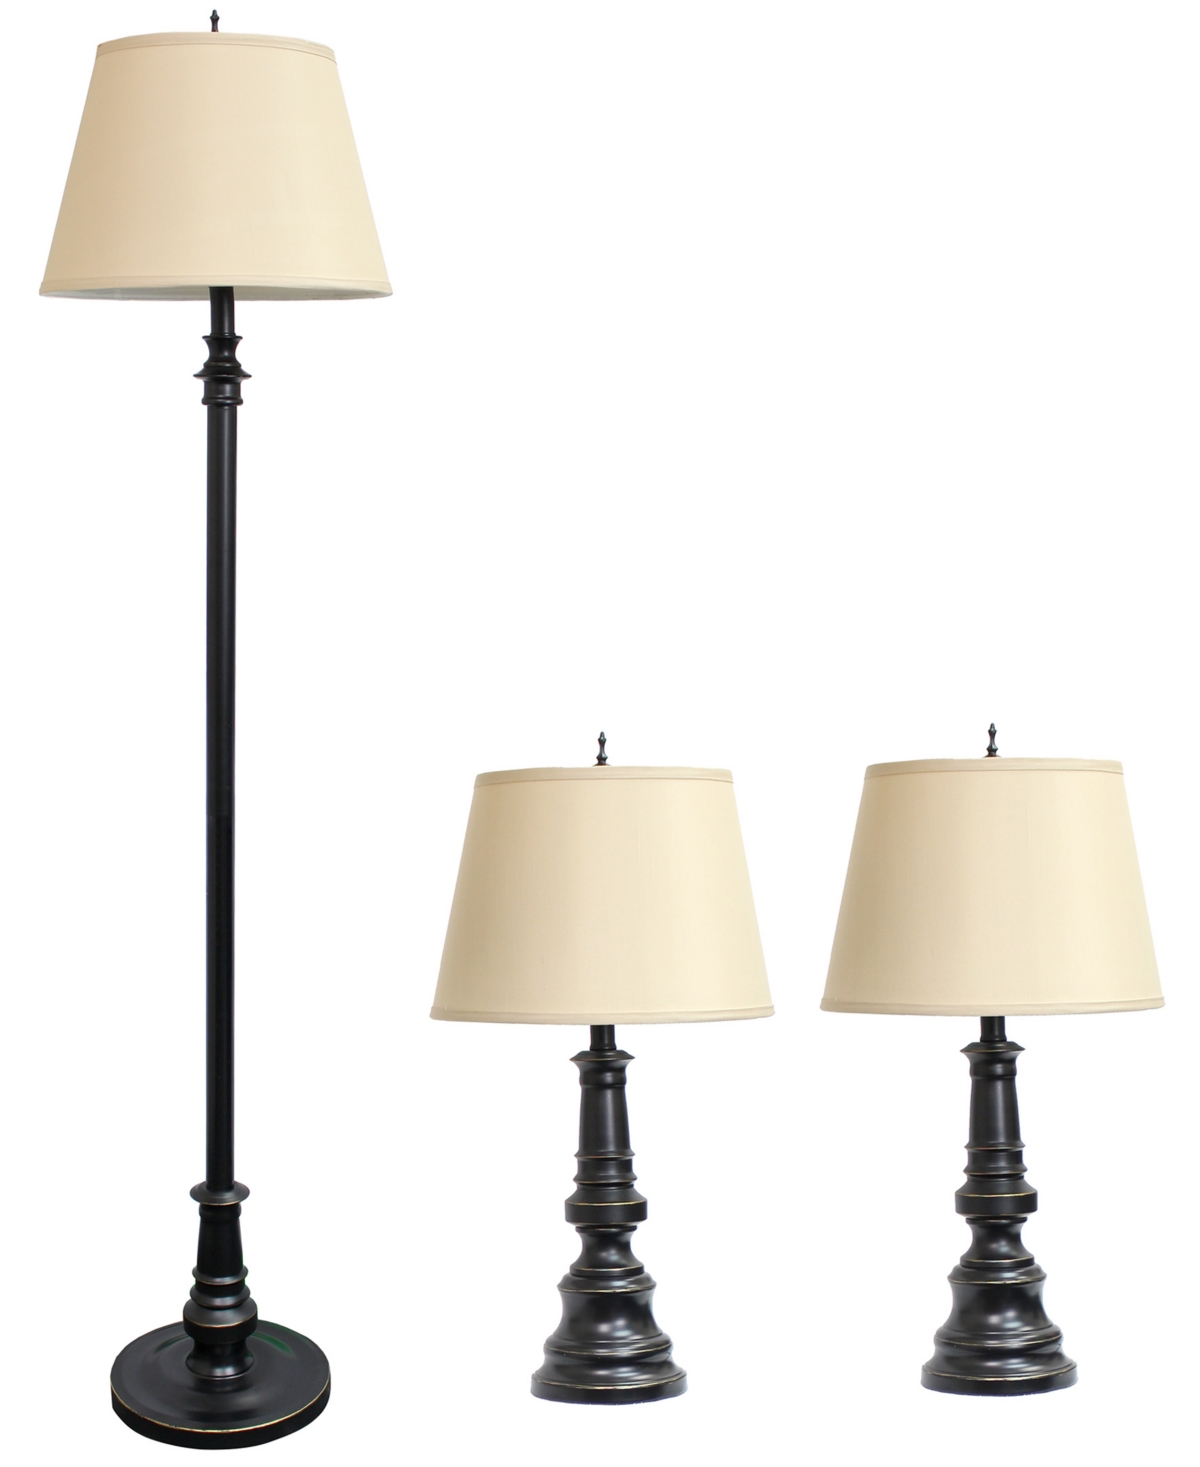 All The Rages Lalia Home Oxford Classic 3 Piece Metal Lamp Set In Restoration Bronze